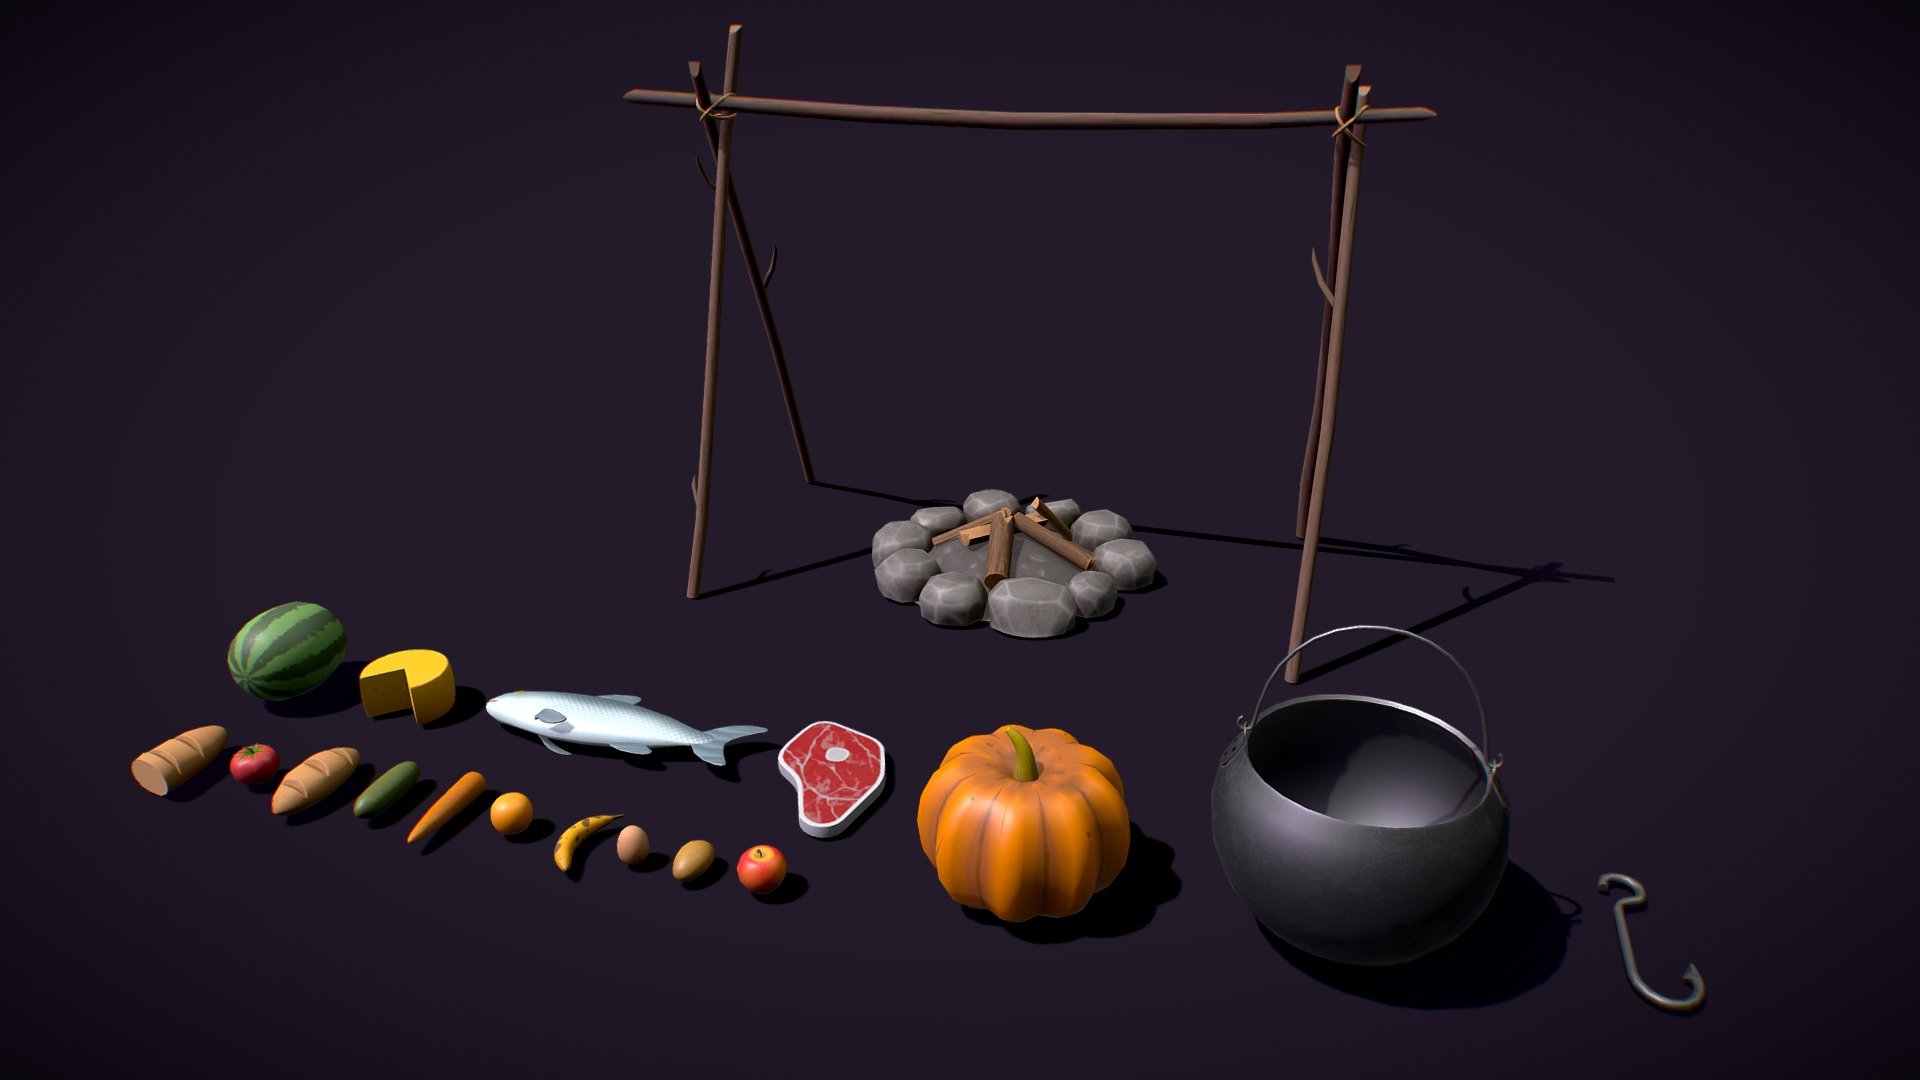 A collection of 15 Stylized Medieval Foods, Including Campfire, Cooking Pot and More with Stylized PBR Textures. Suitable for any scene. Ready to use in any project.

Are you liked this Package? Feel free to take a look on my another models! Here

Features:

.Fbx, .Obj, .Uasset and .Blend files.

Low Poly Mesh game-ready.

Real-World Scale (centimeters).

Unreal Project 4.20+

Custom Collision for Unreal Engine 4 (Handmade).

Tris Count: 192 to 1,908.

Number of Textures (PNG): 96

Number of Textures (UE4/UE5): 58

Number of Materials (UE4/UE5): 2 Materials and 21 Material Instances

PBR Textures (256x256), (512x512), (1024x1024) and (2048x2048) (PNG).

Type of Textures: Base Color, Roughness, Metallic, Normal Map and Ambient Occlusion (PNG).

Combined RMA texture (Roughness, Metallic and Ambient Occlusion) for Unreal Engine 4 (PNG) 3d model